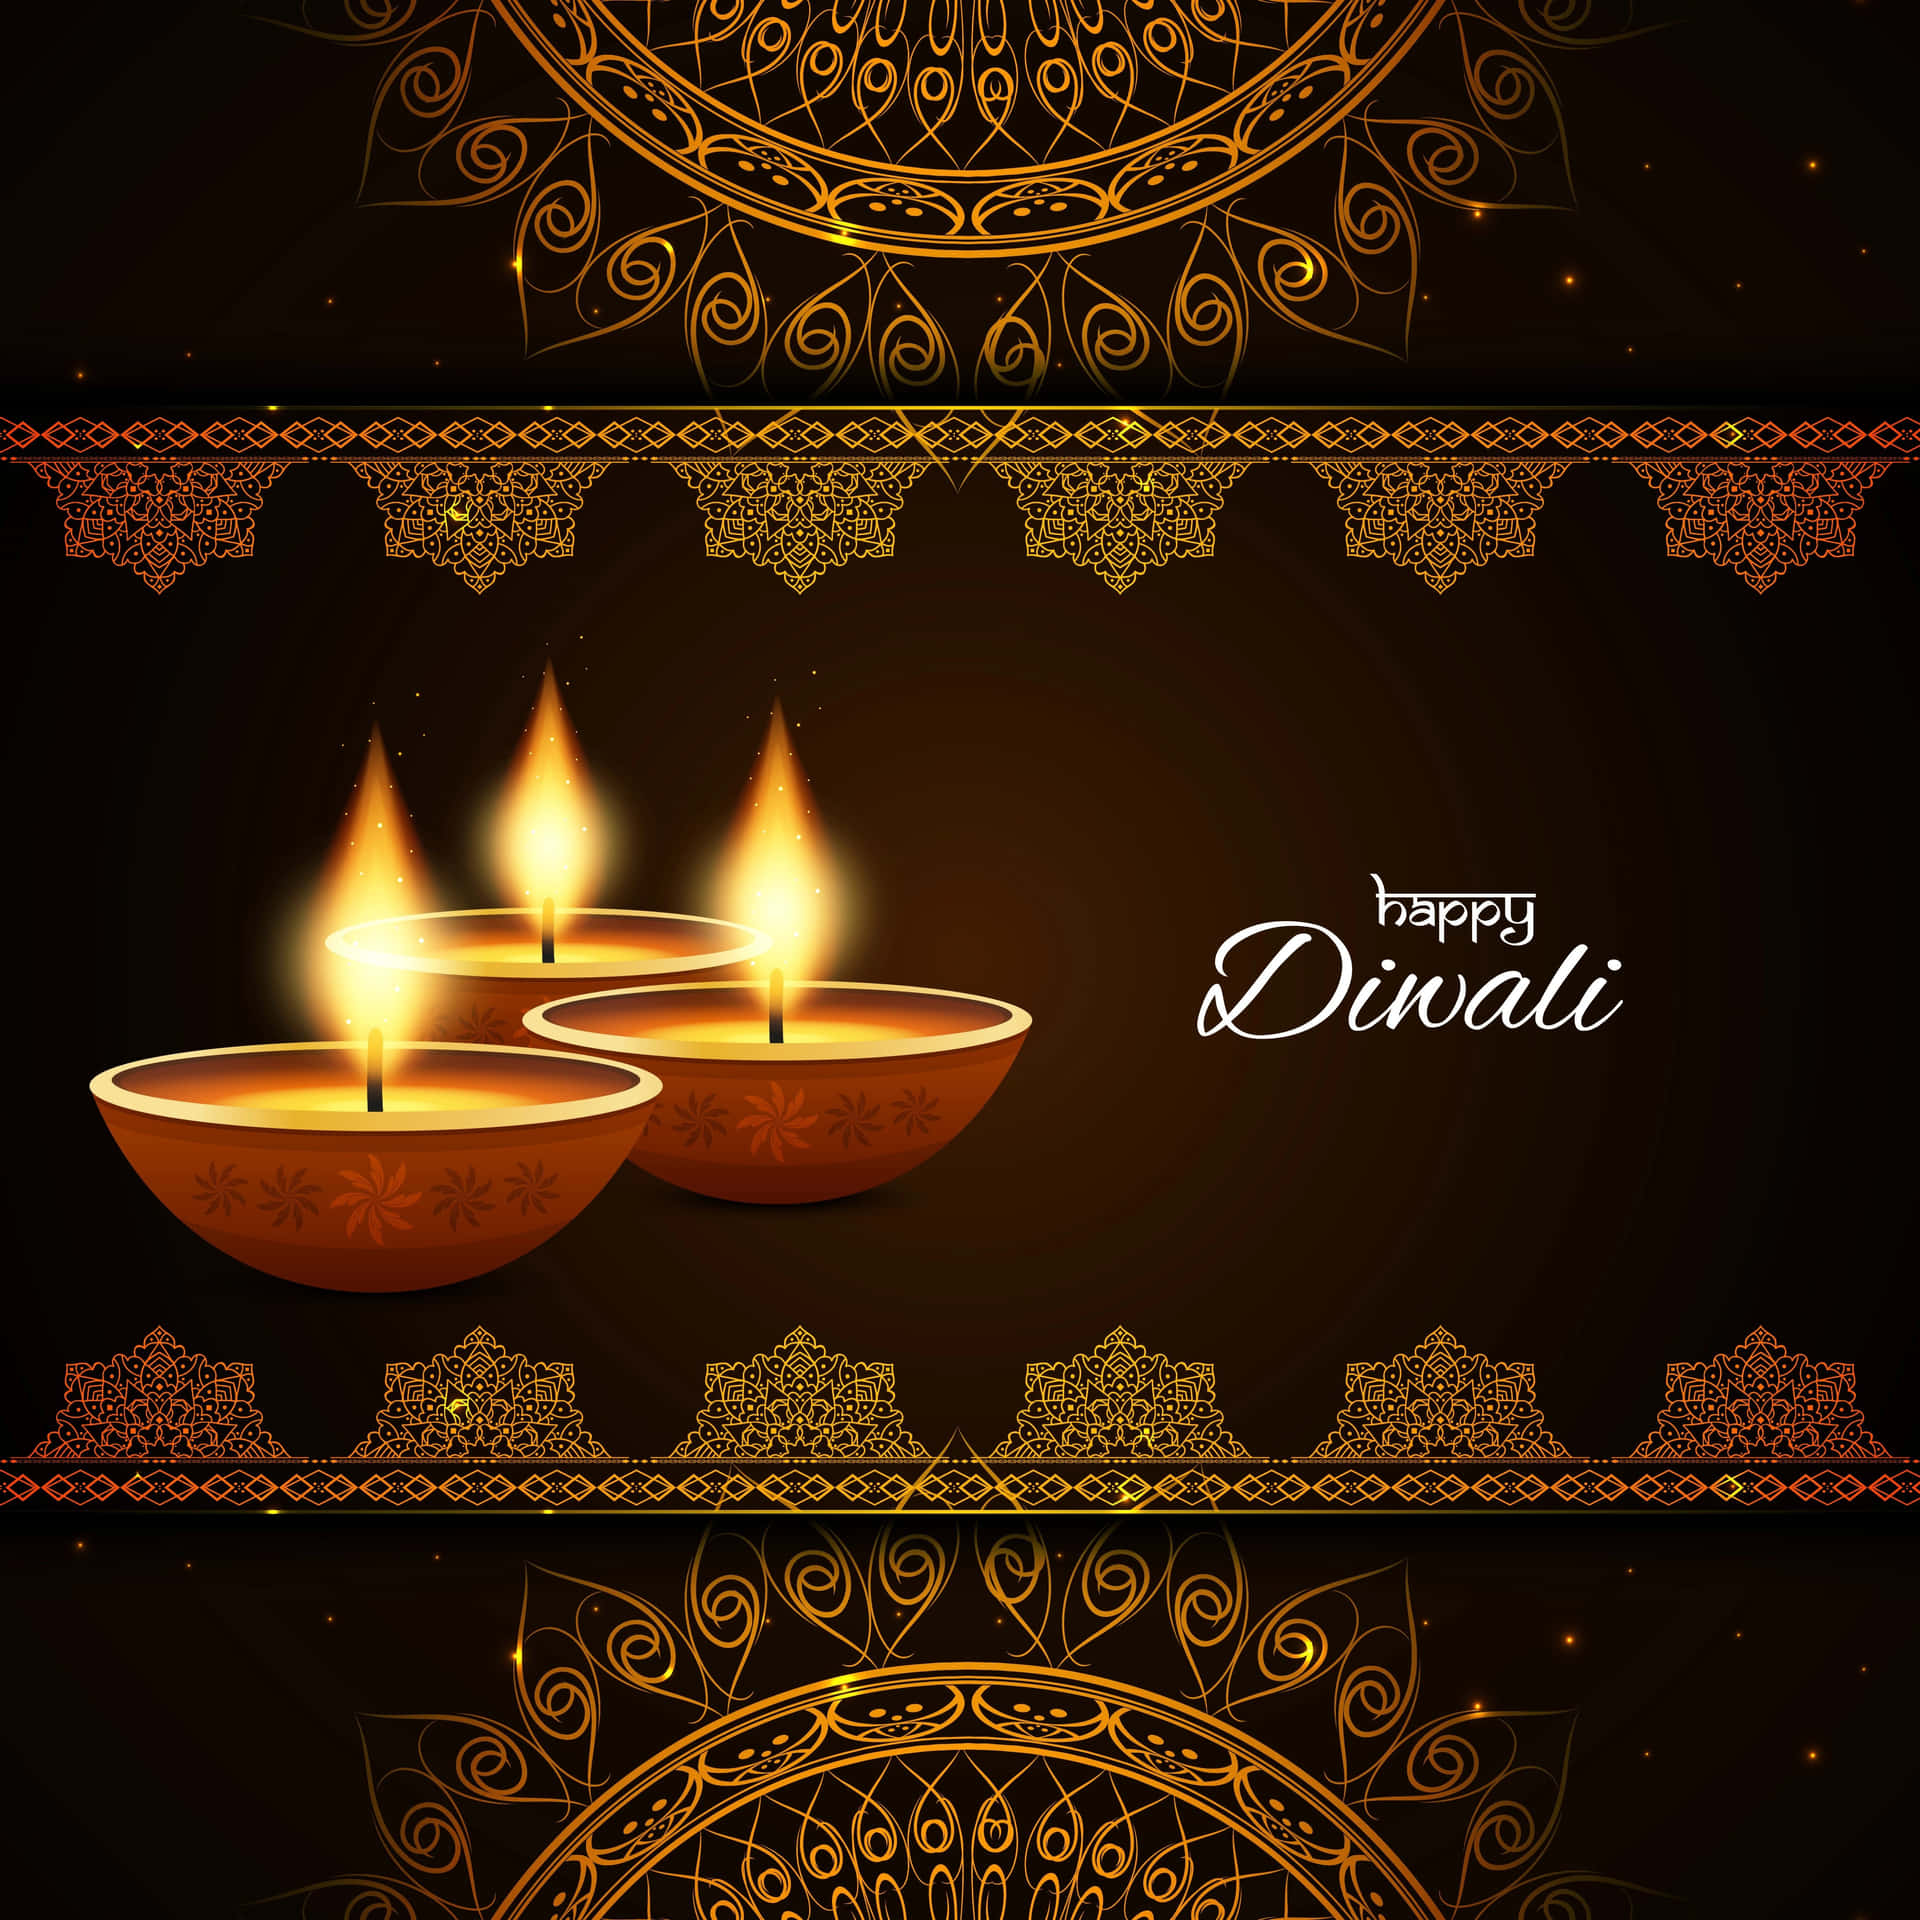 Happy Diwali Greeting Card With Three Lit Candles